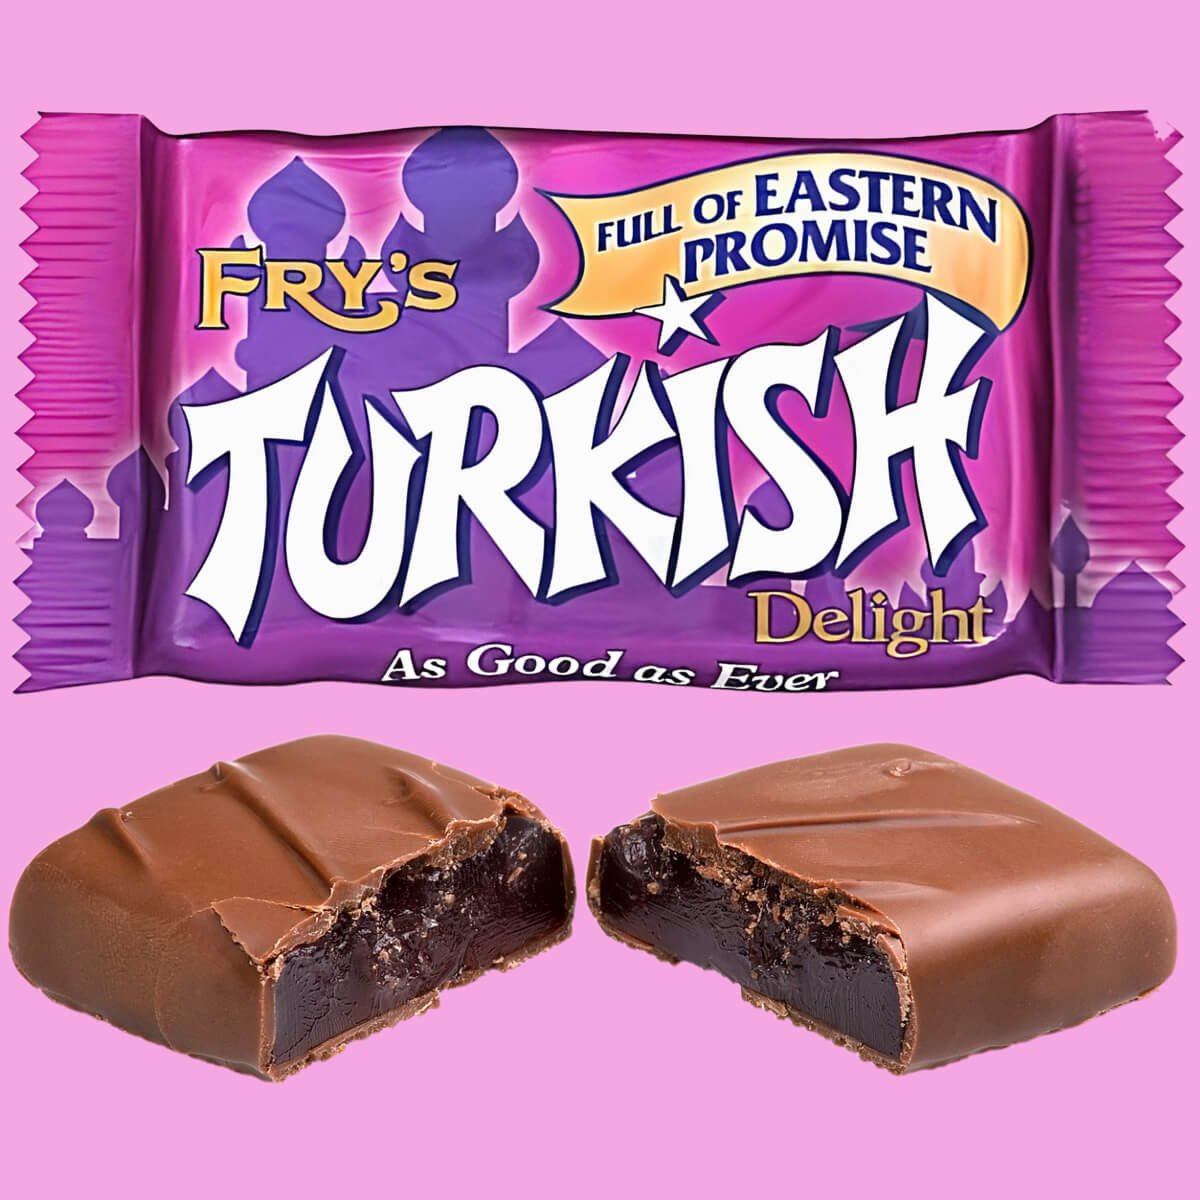 Fry's Turkish Delight - History and Facts